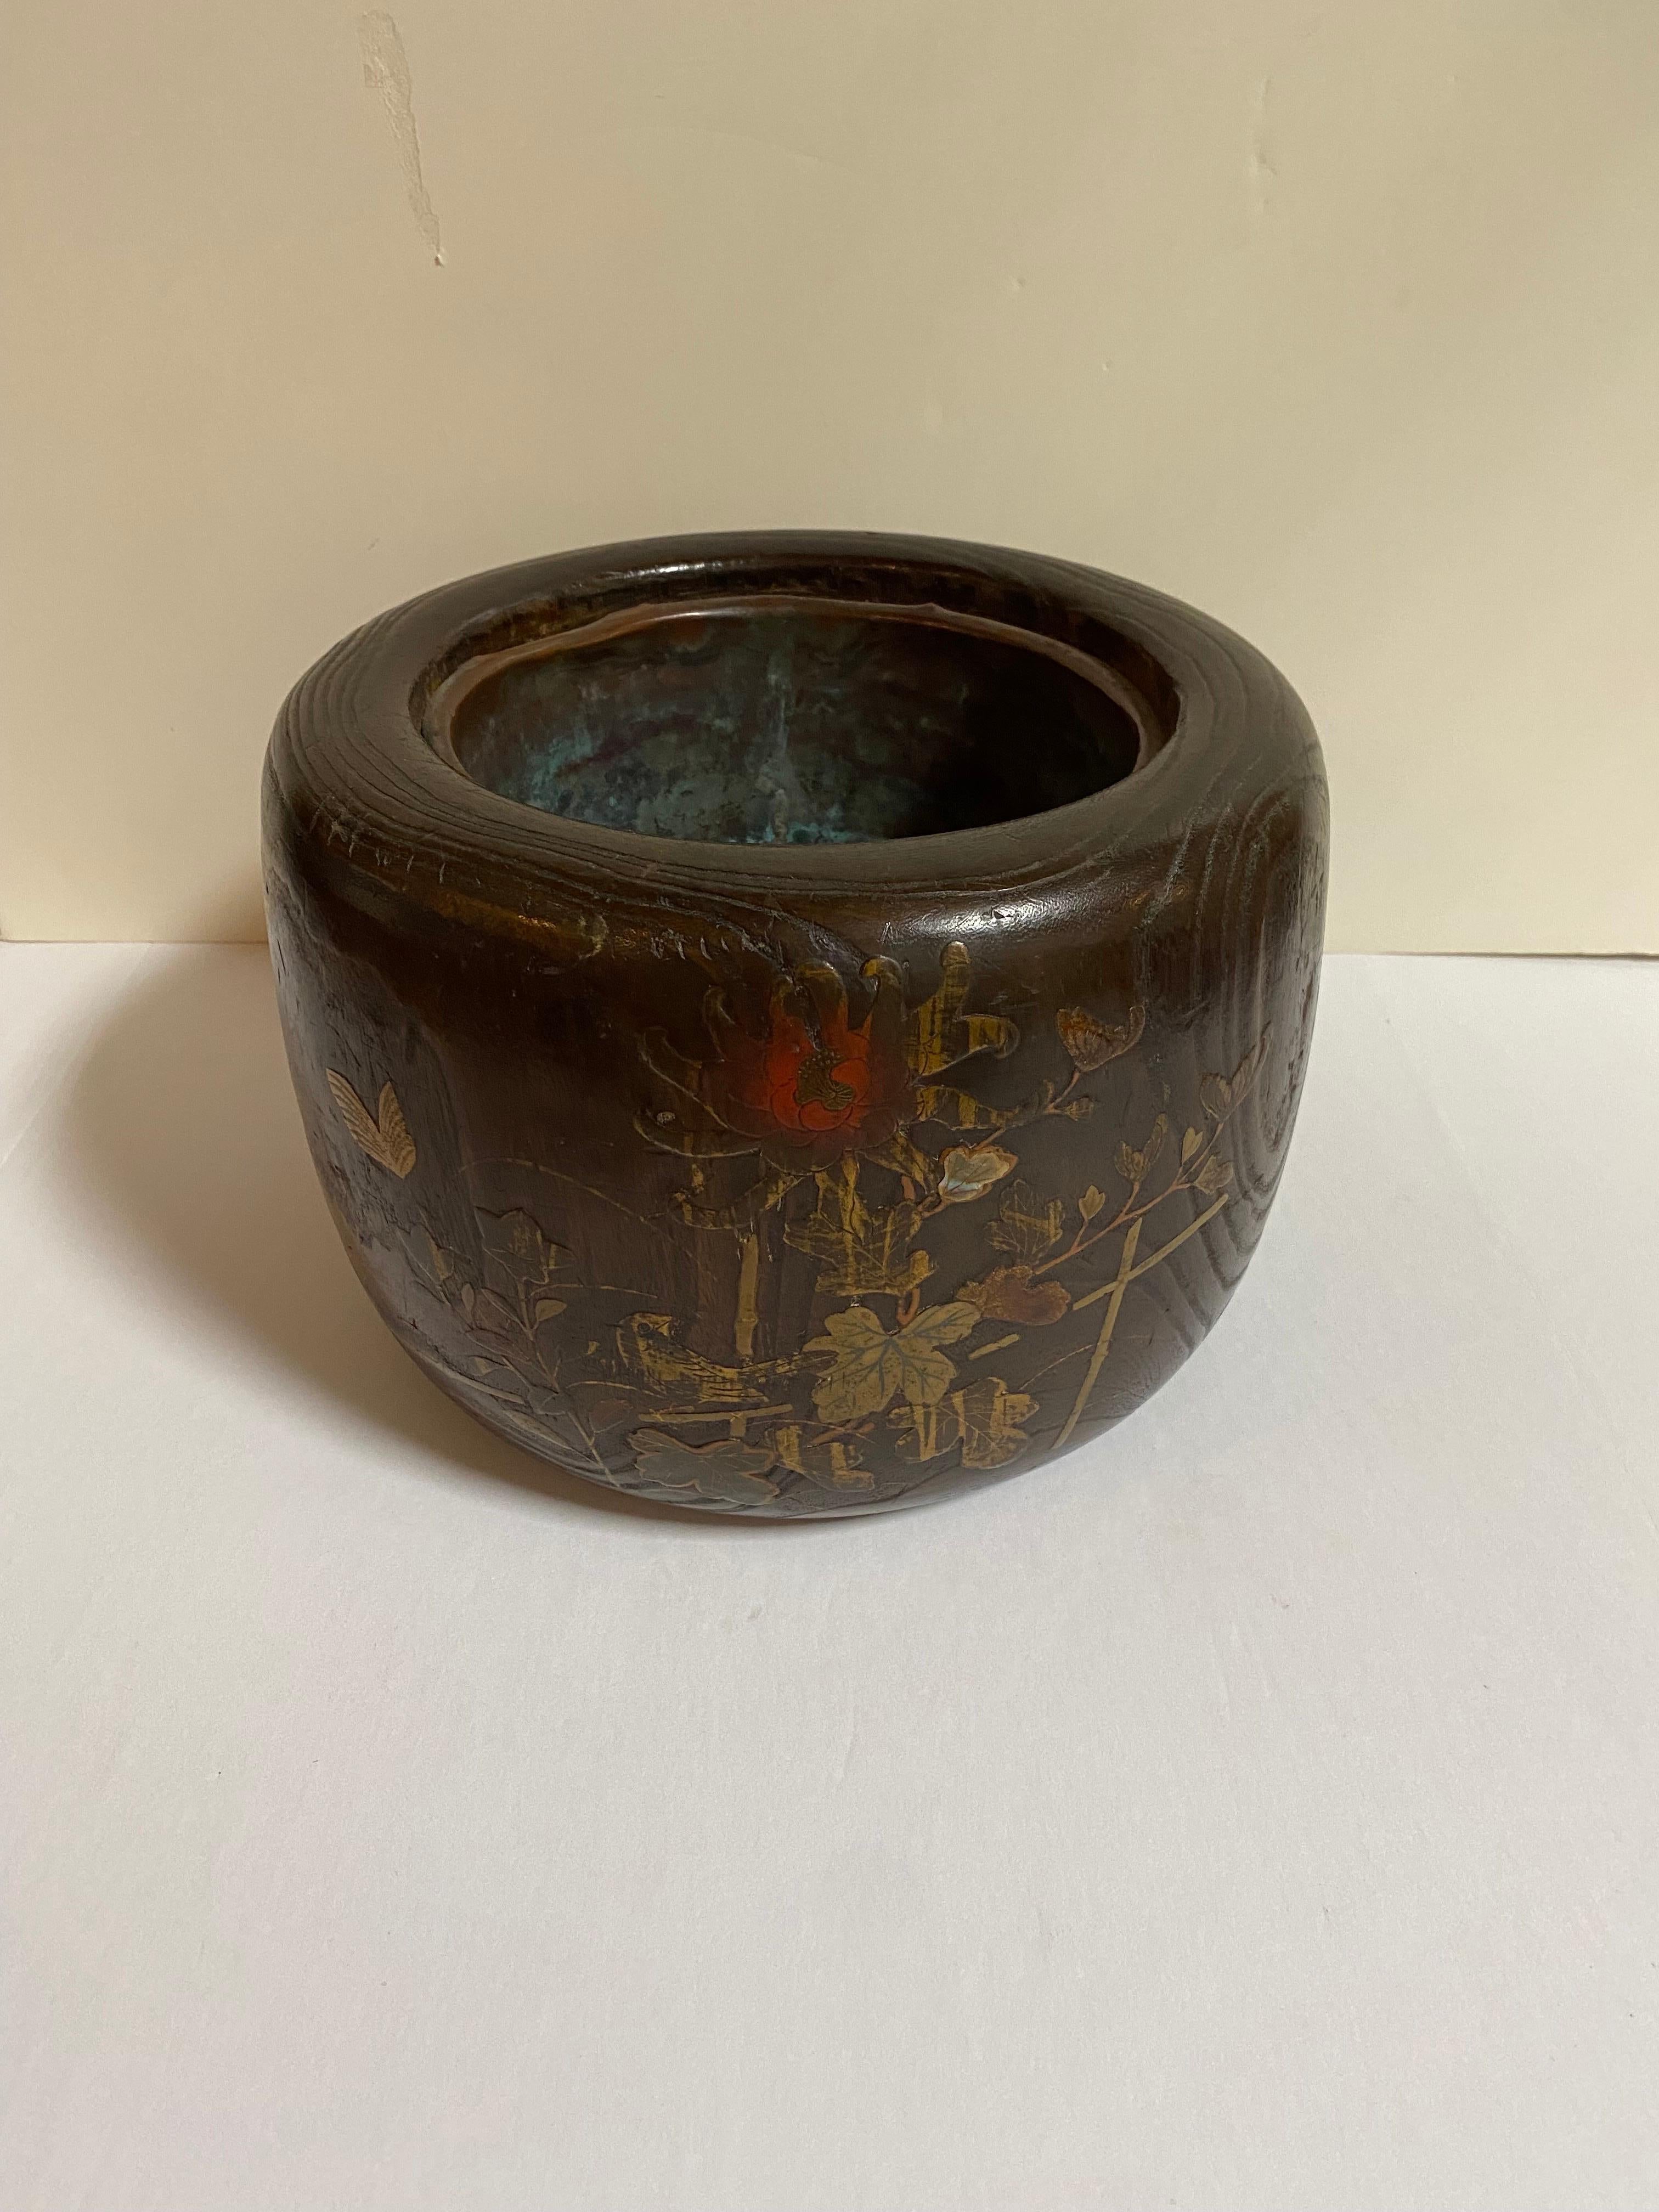 A very fine antique Japanese domaru (tree trunk) hibachi ideal for display or use as planters.

Likely dating to the Meiji period (1868–1912).

Hand carved from a solid piece of wood and decorated with flora and fauna design in gilt and mother